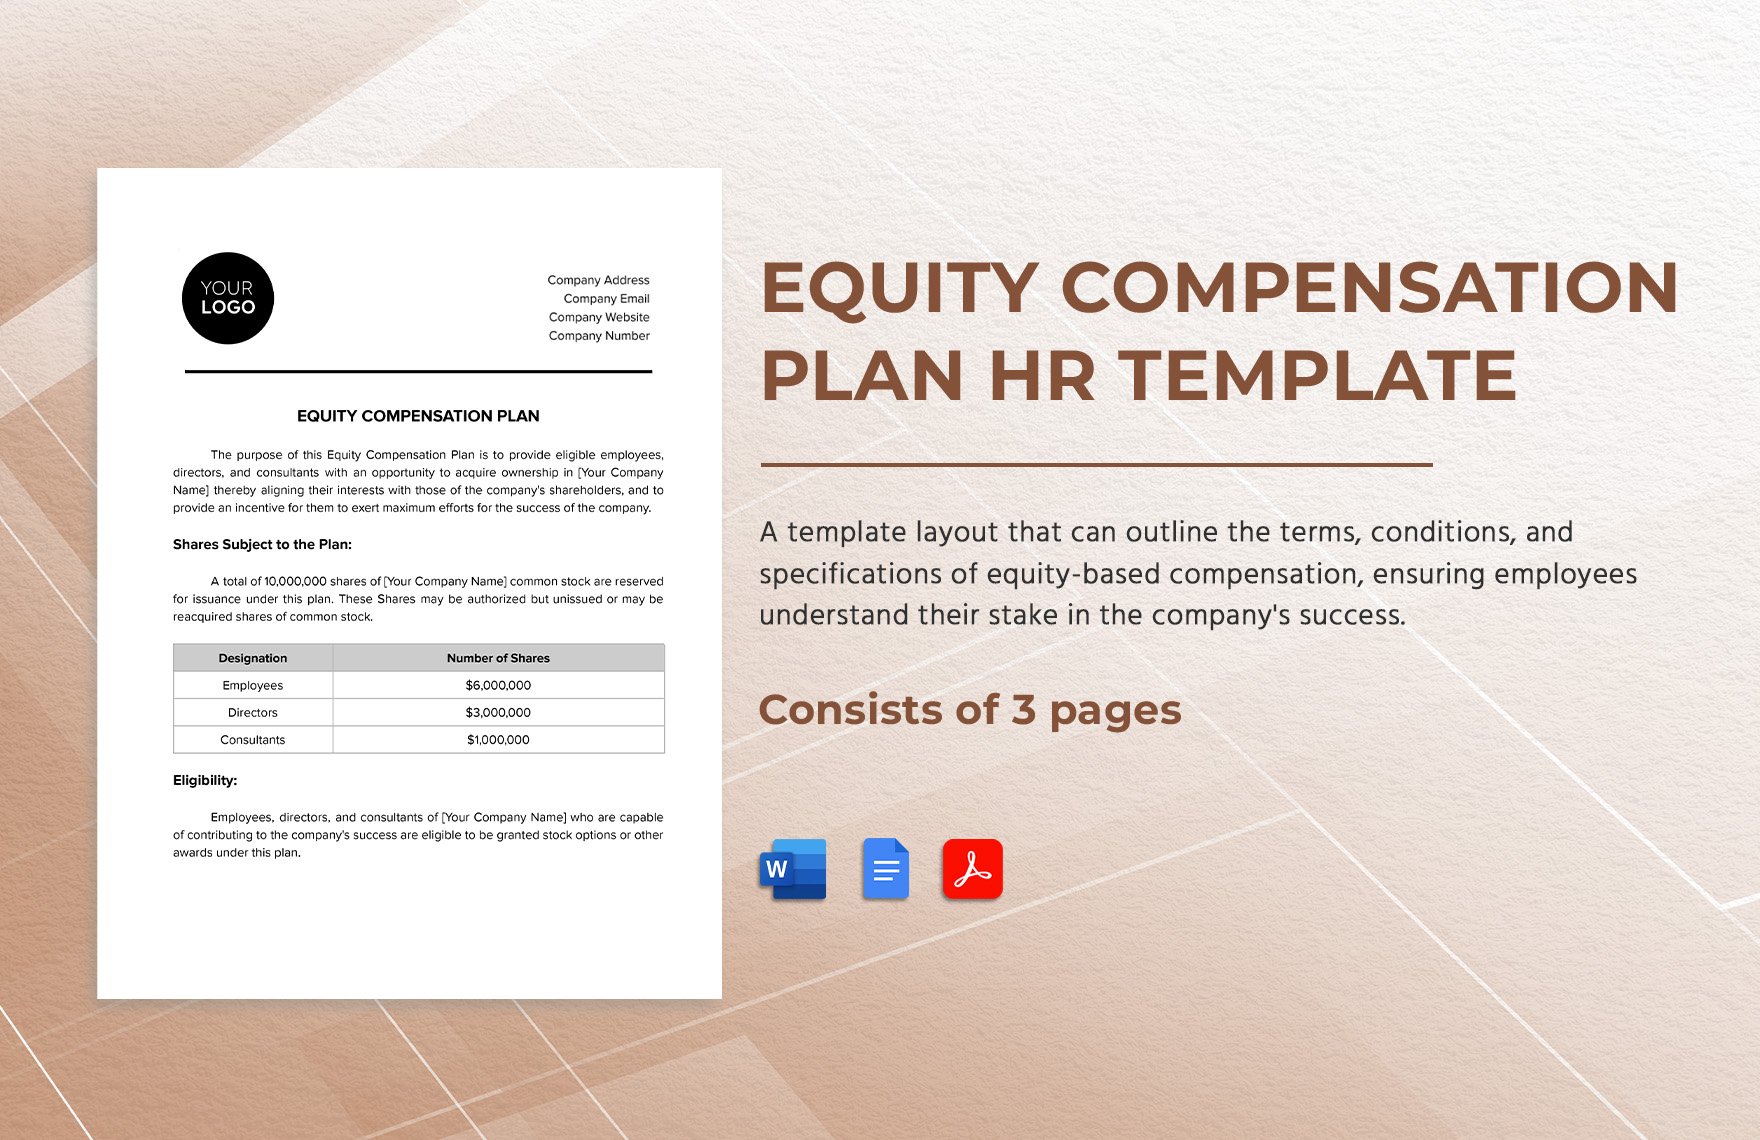 Equity Compensation Plan HR Template in Word, Google Docs, PDF